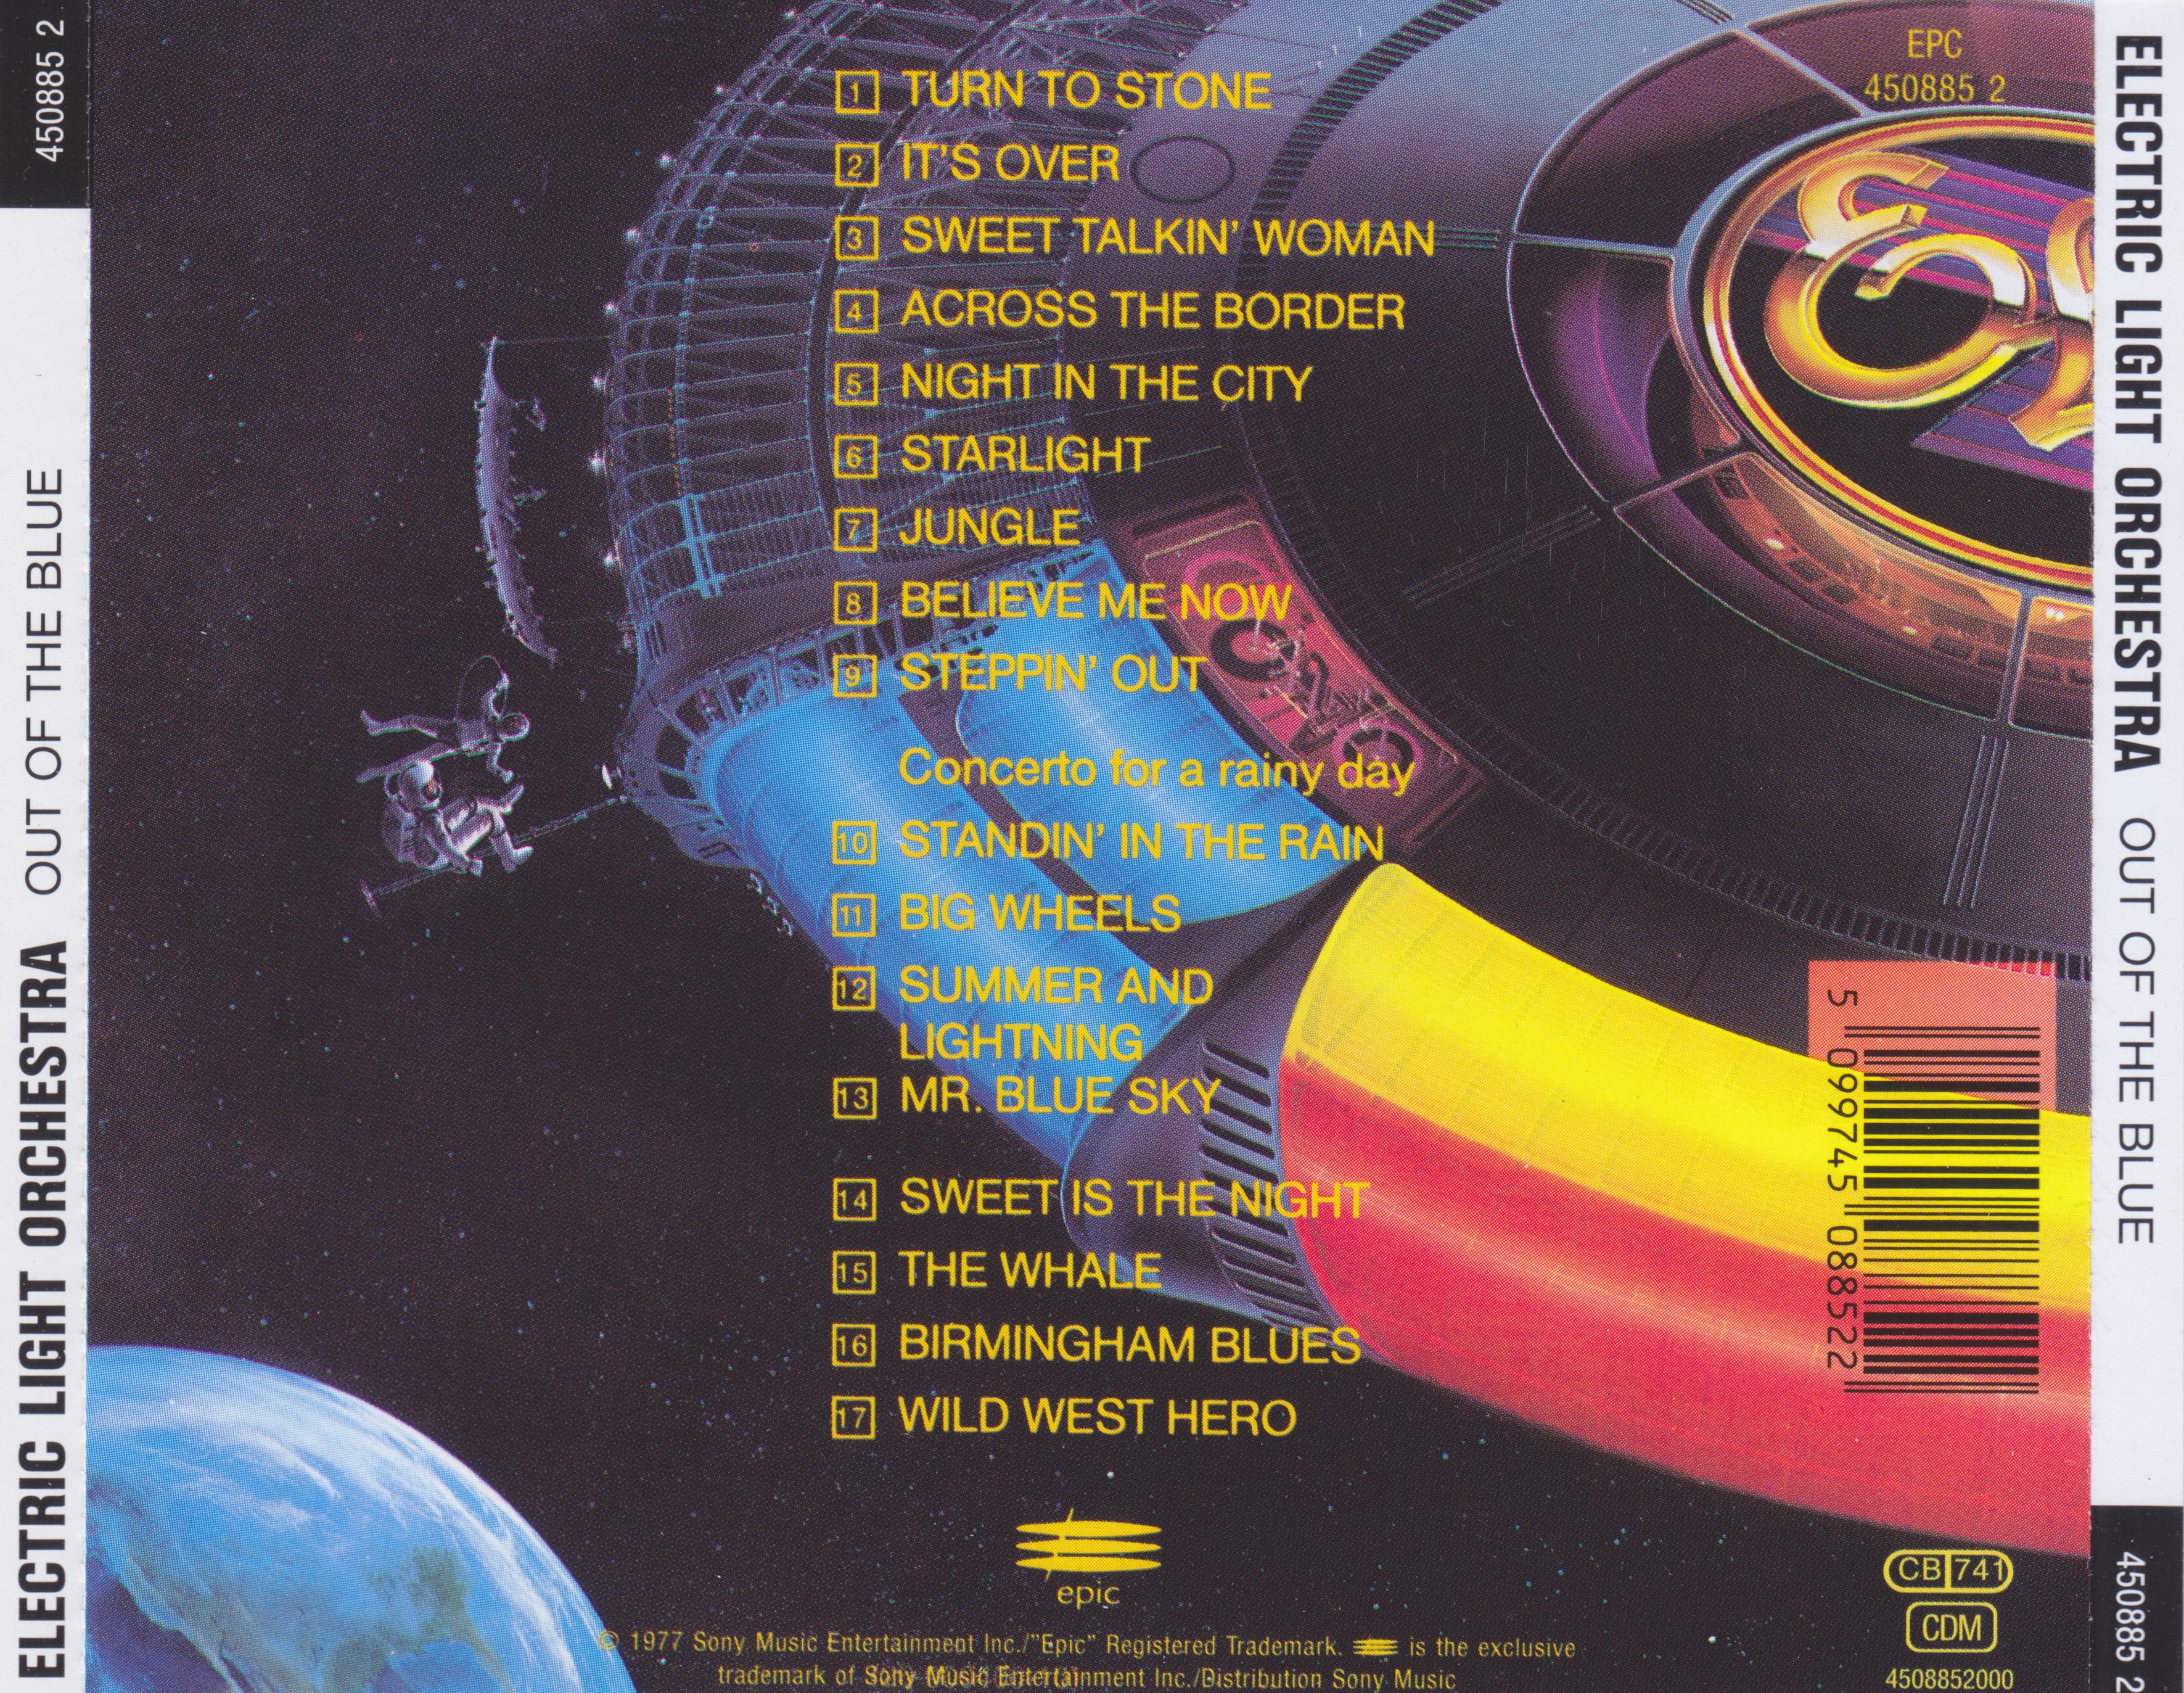 Blue skies electric light orchestra. Electric Light Orchestra 1977. Electric Light Orchestra out of the Blue 1977. Electric Light Orchestra (Elo)__out of the Blue [1977]. Elo 1973 Elo II.